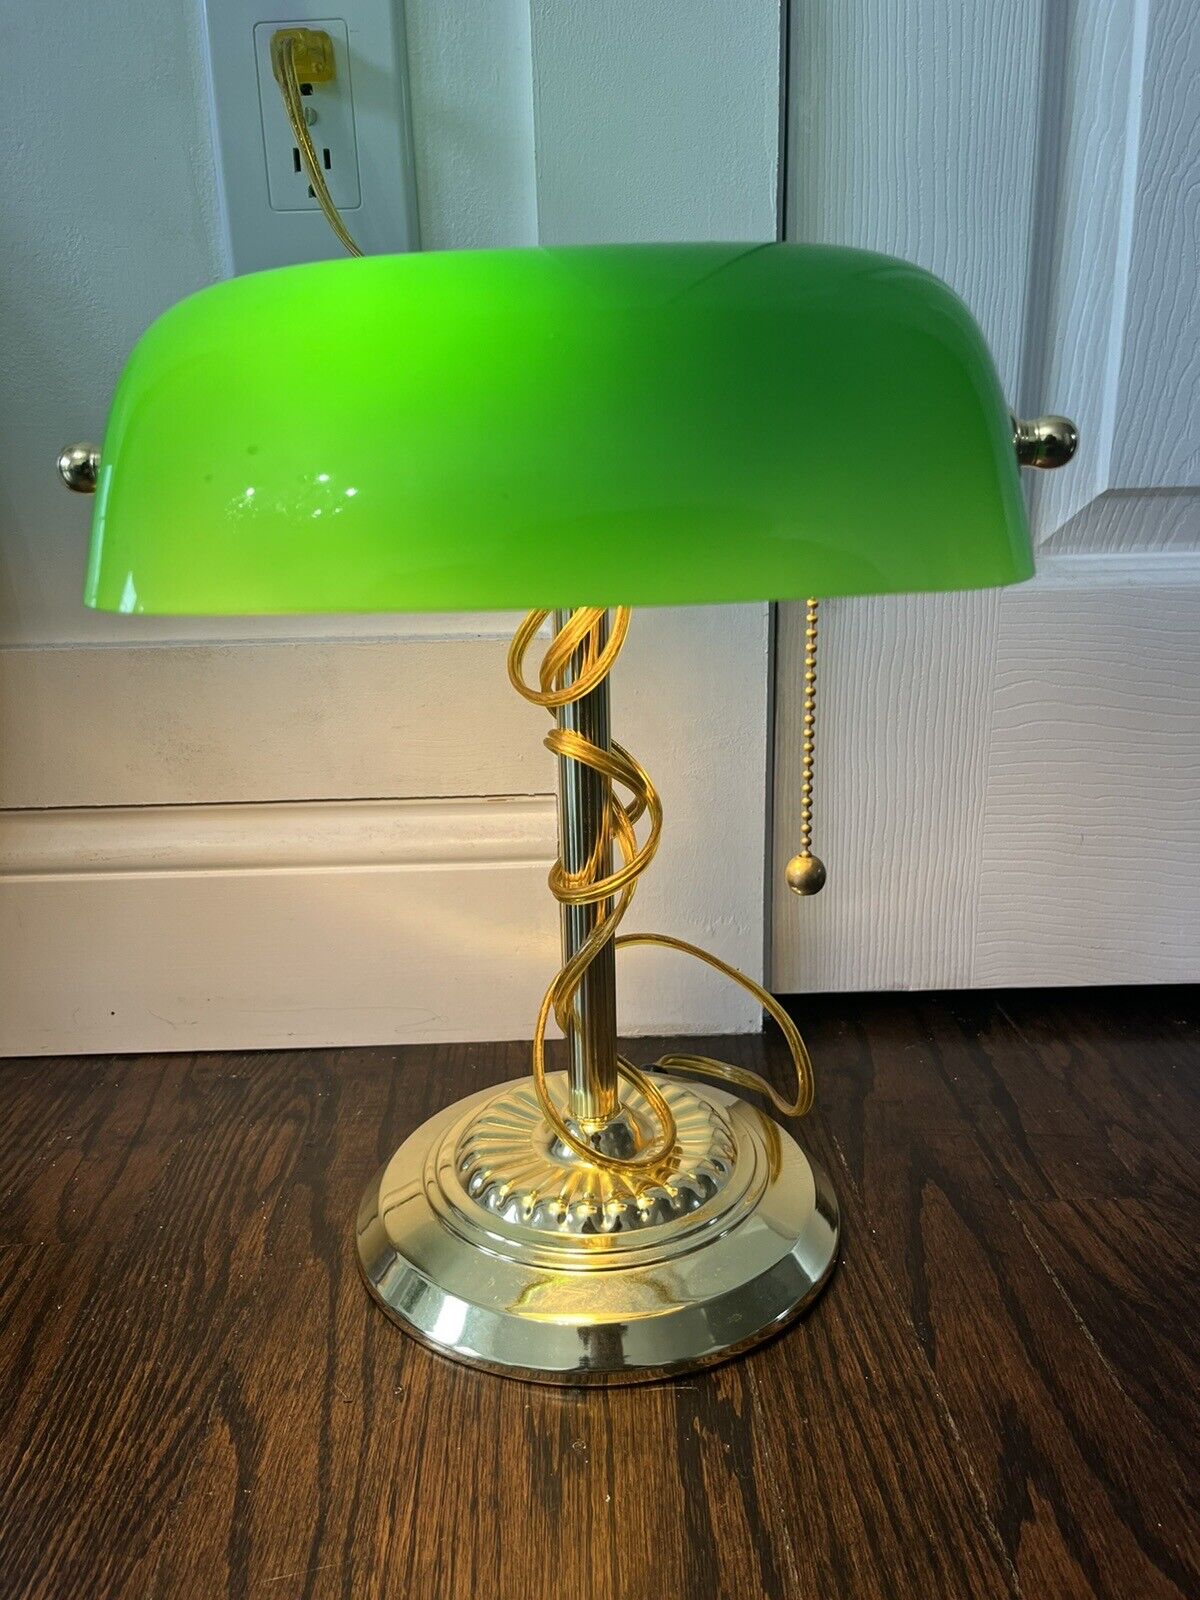 VTG Traditional Bankers Desk Lamp w/ Emerald Green Glass Shade Gold Base Tested